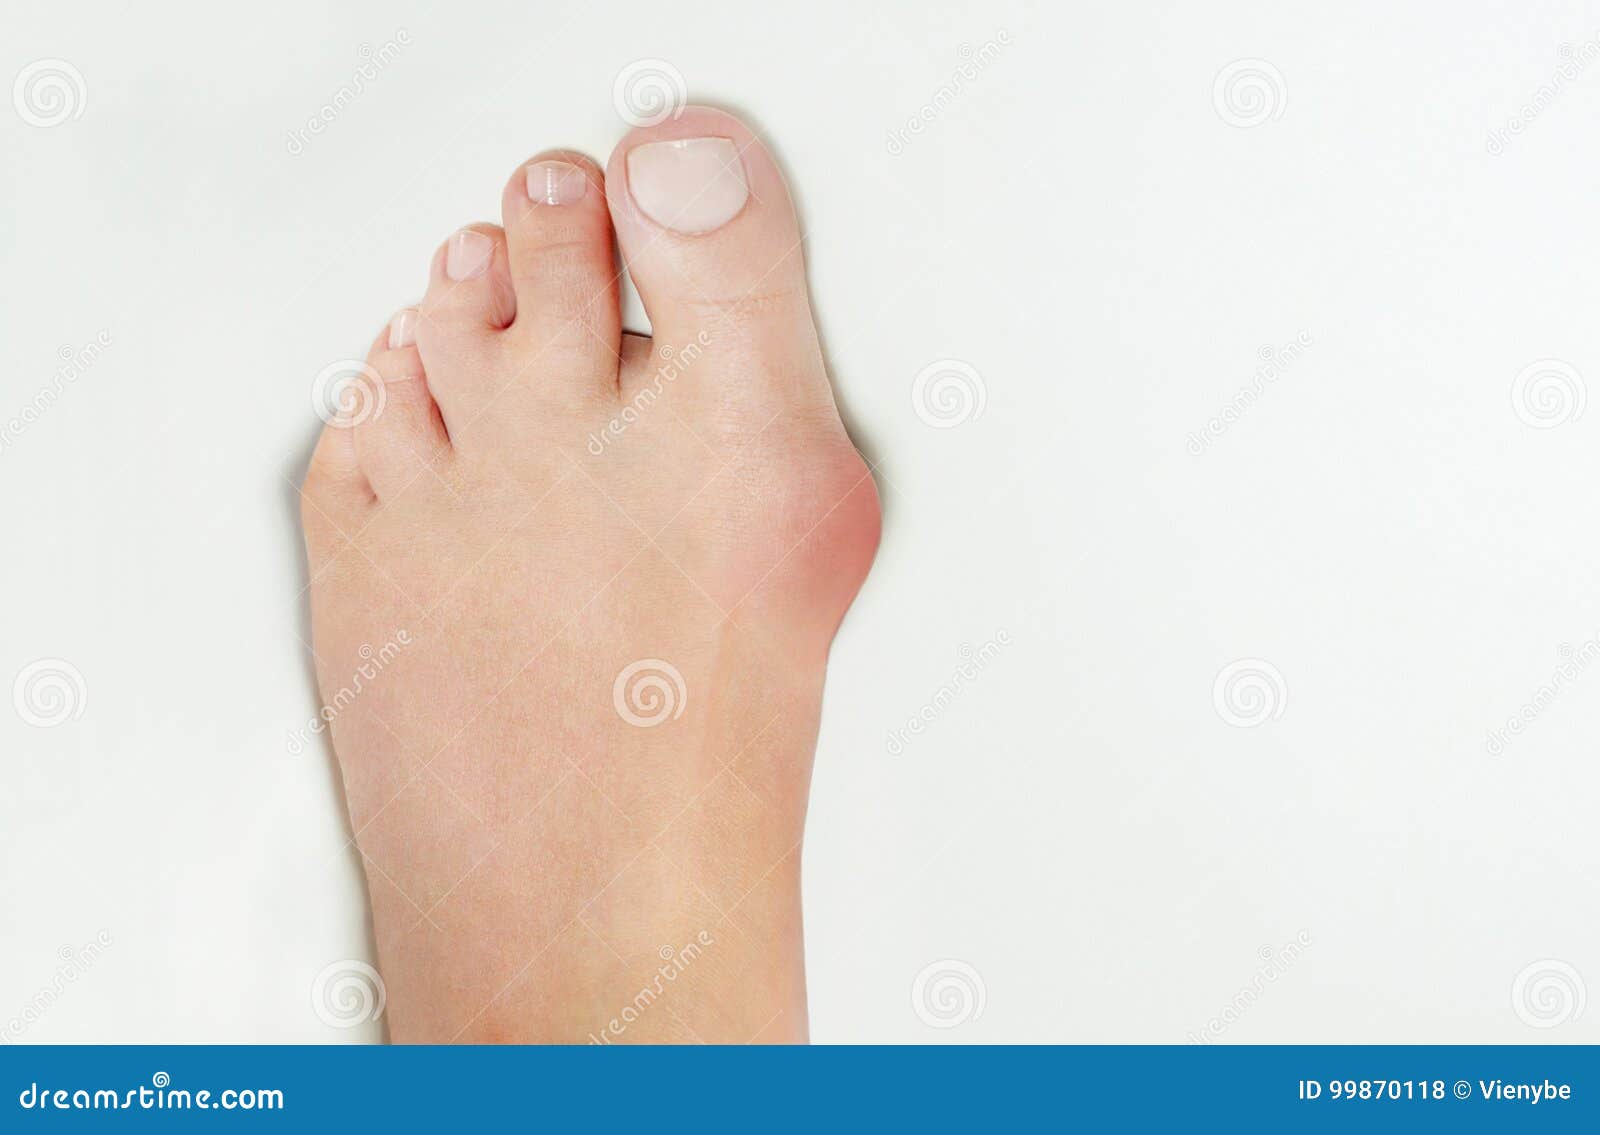 hallux valgus, bunion in woman foot on white background